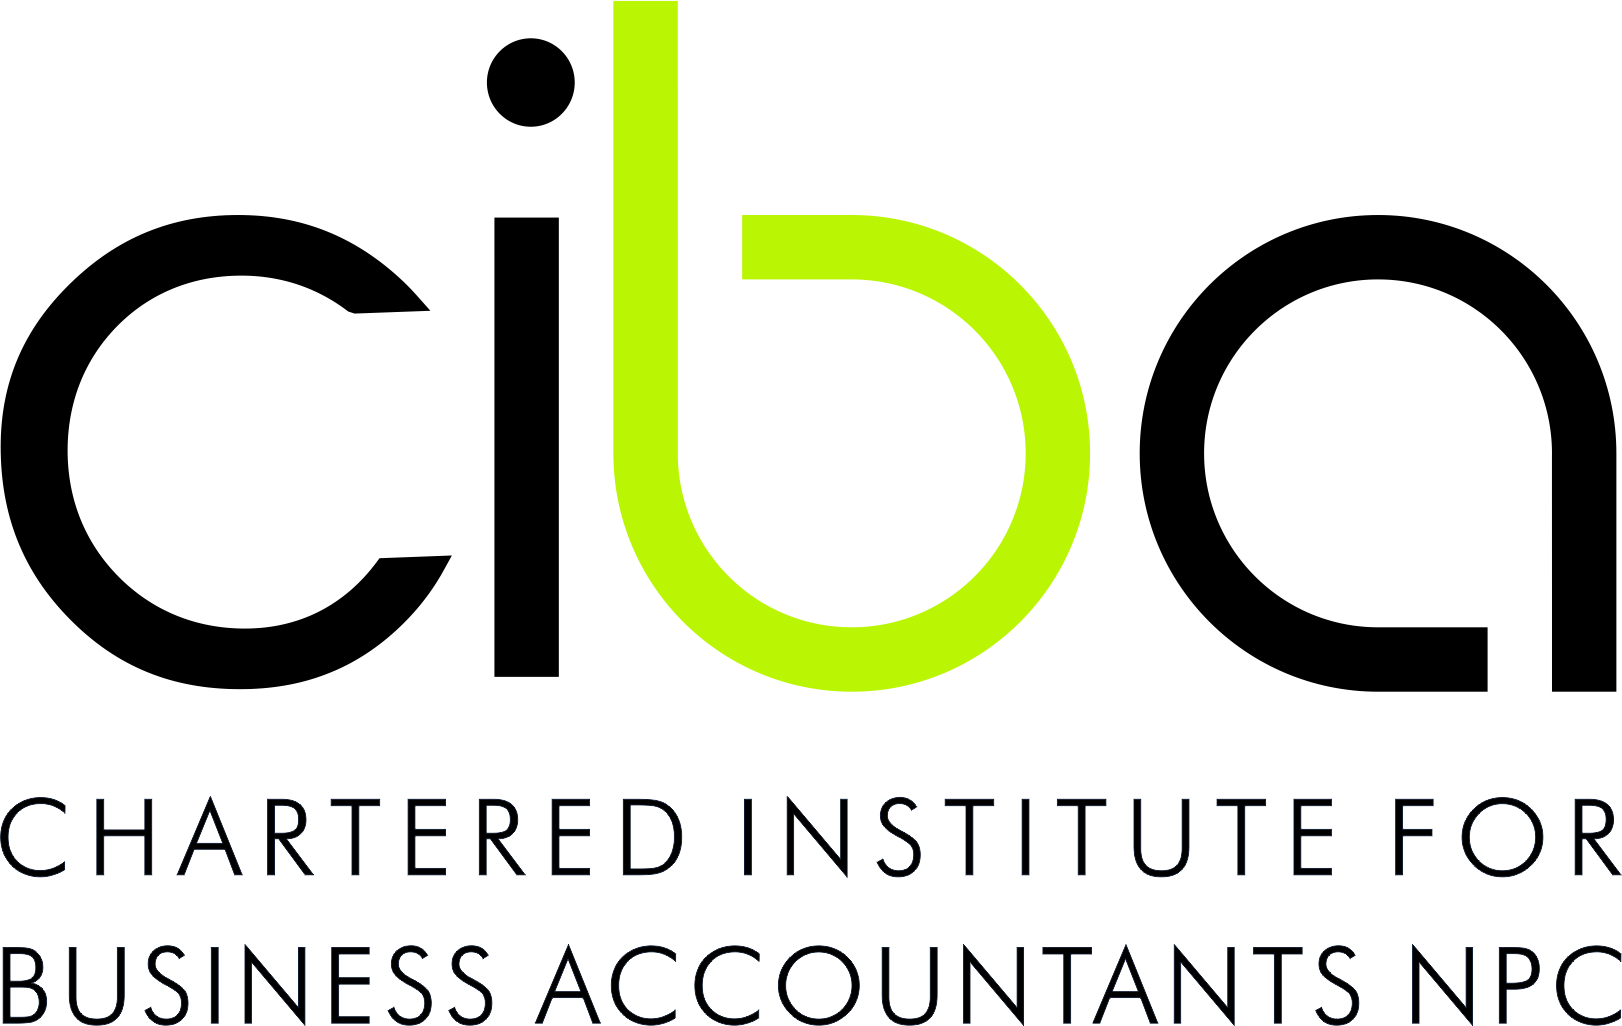 Southern African Institute for Business Accountants